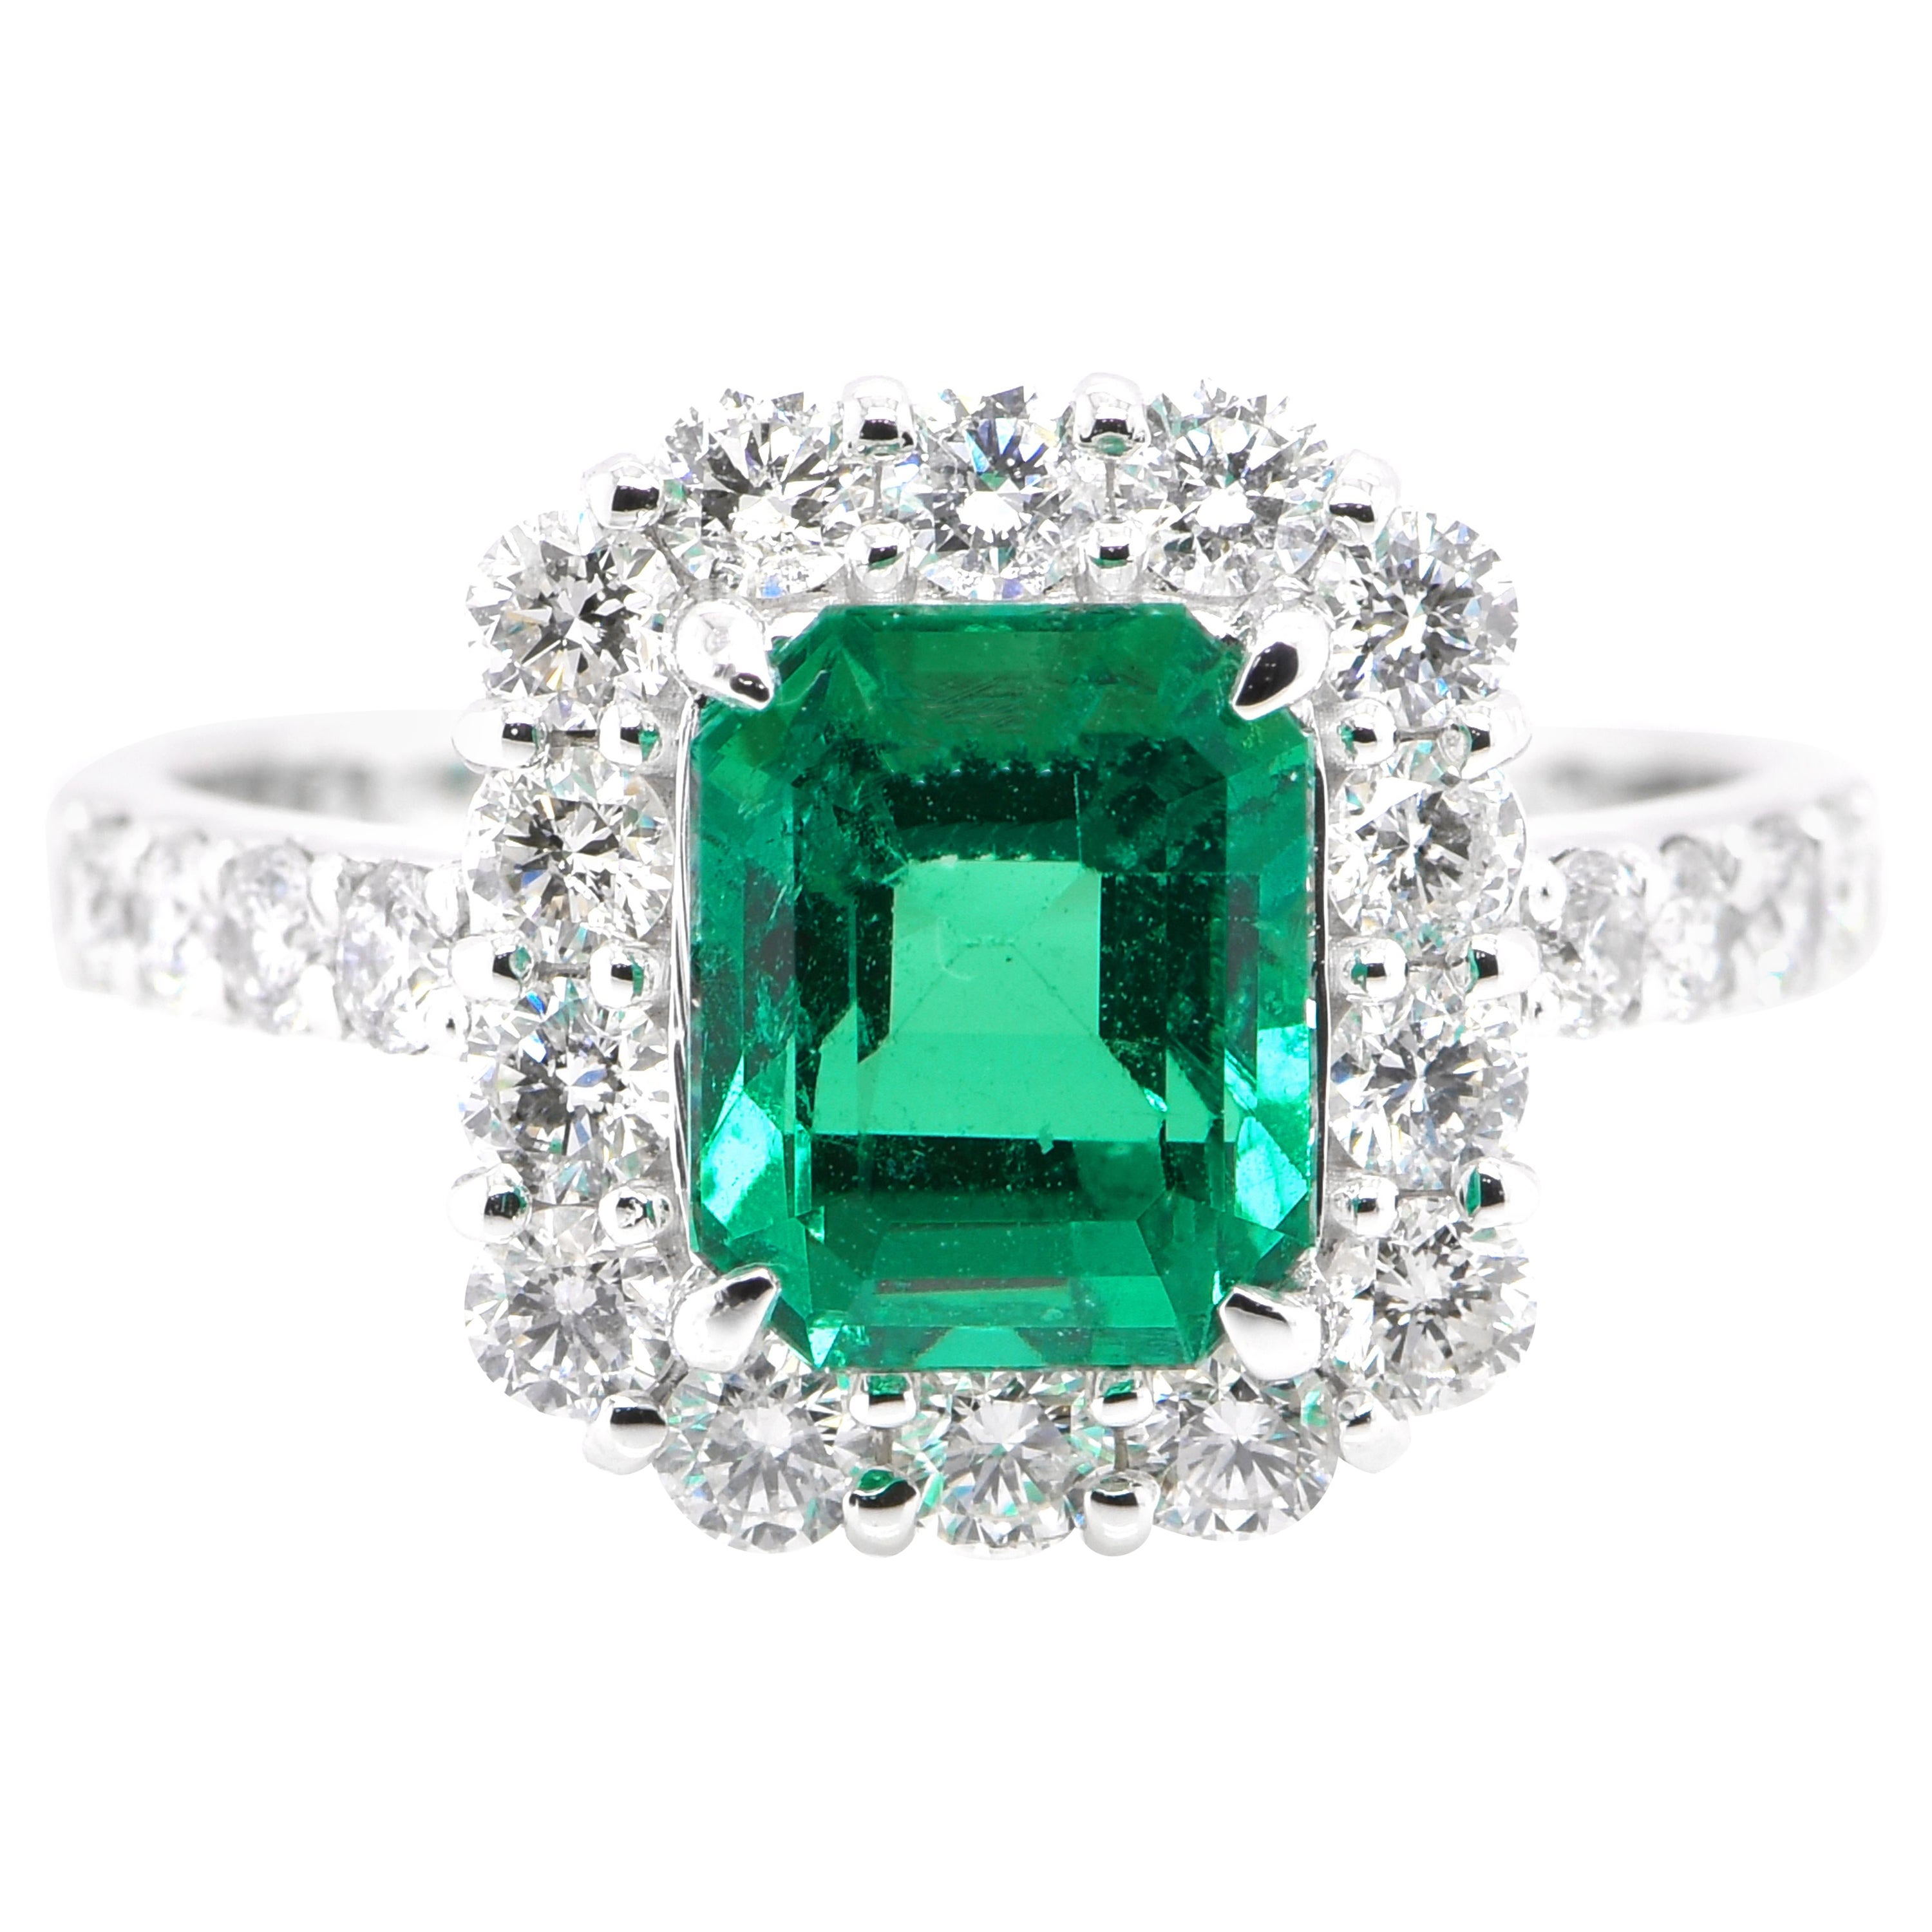 GIA Certified 1.82 Carat Natural Colombian Emerald Ring Set in Platinum